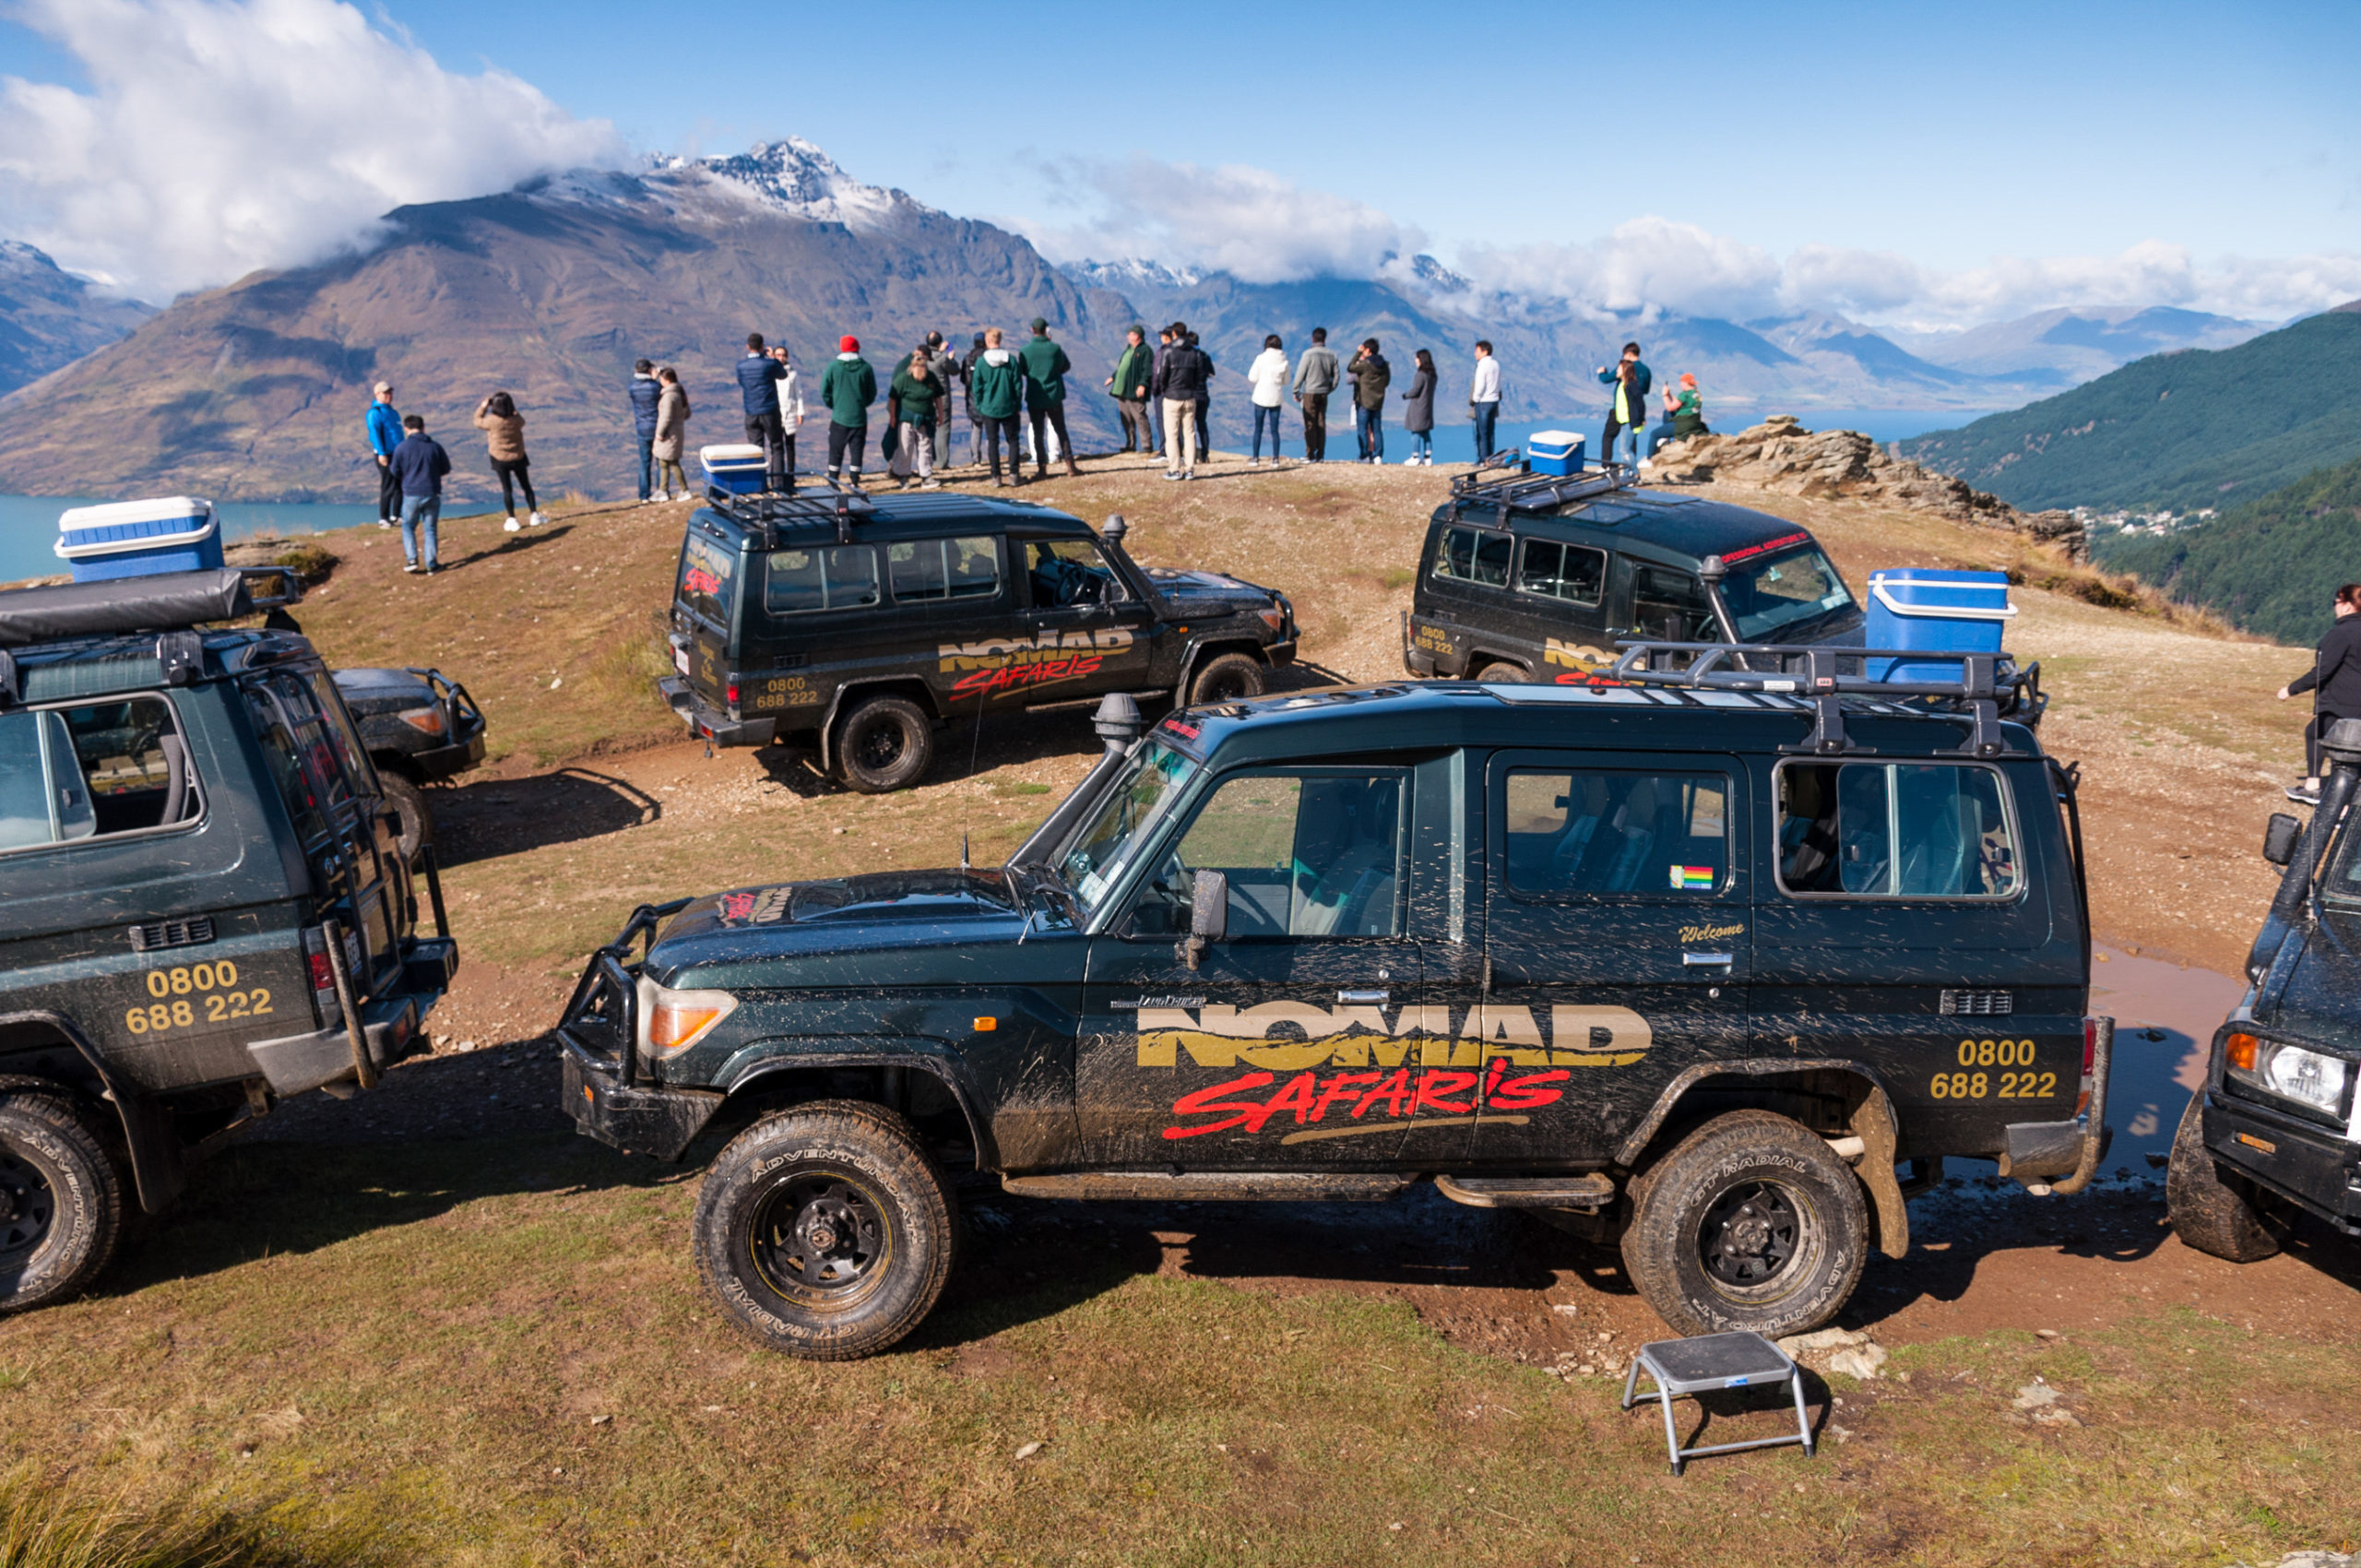 4WD vehicles at scenic location